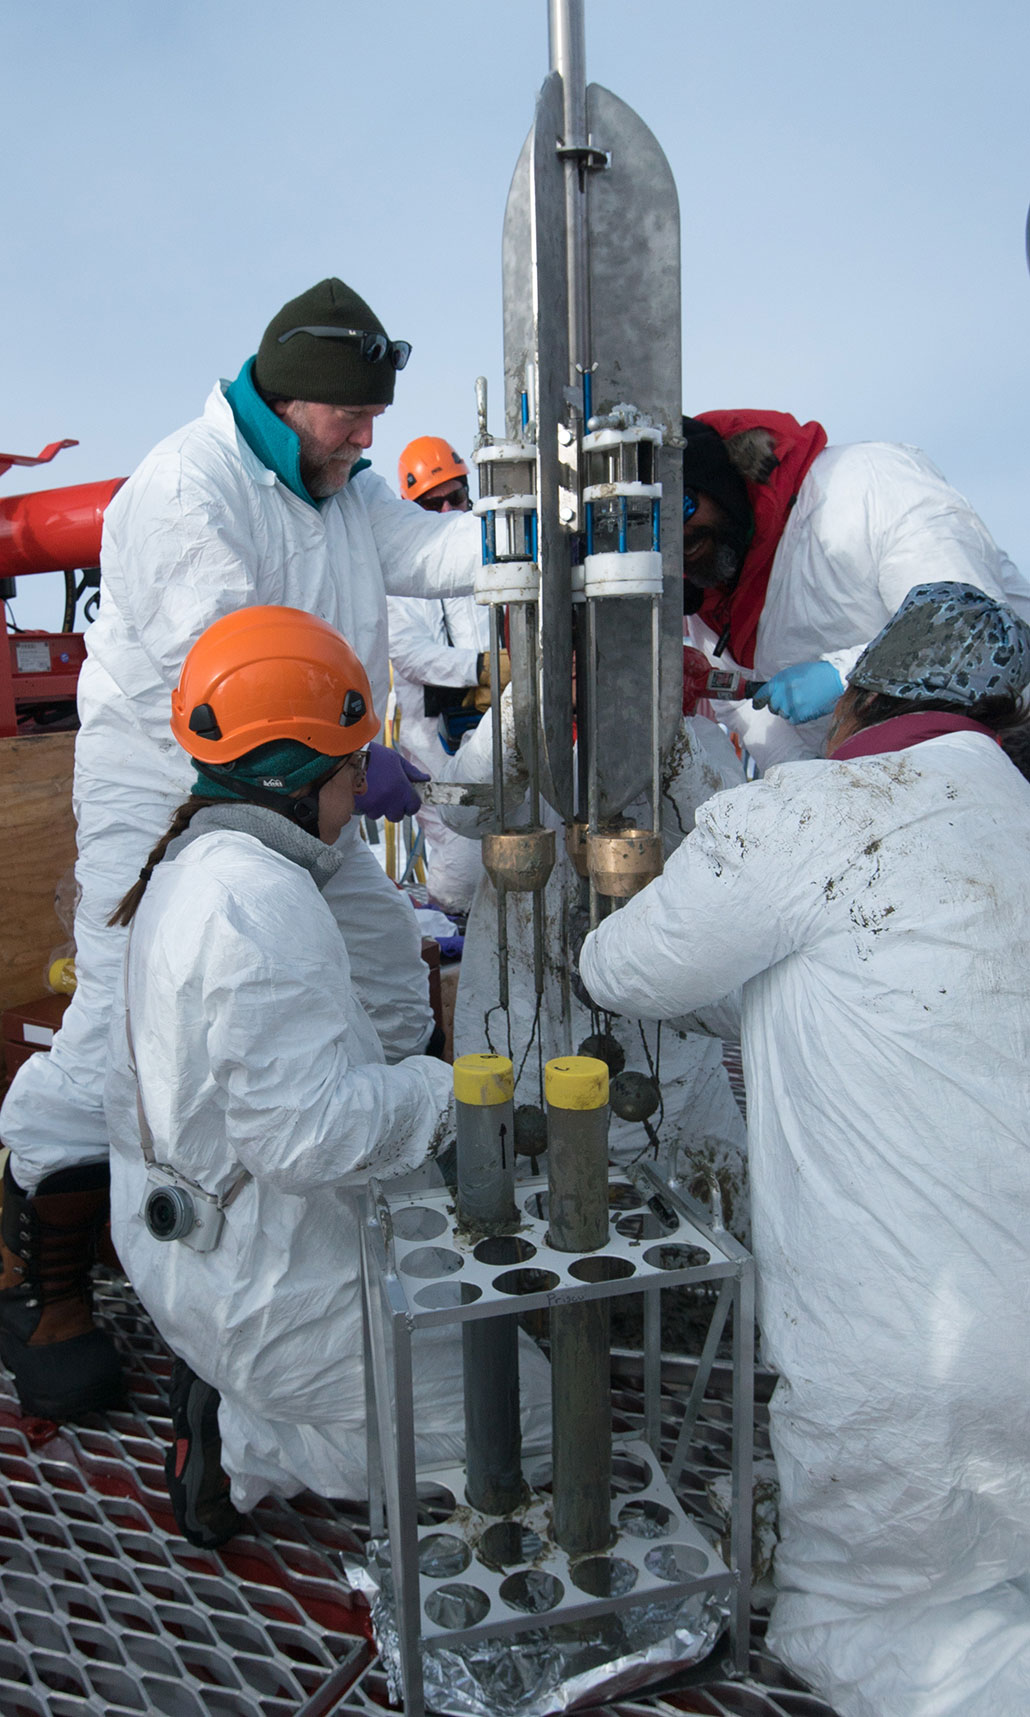 A photo of four researchers around the apparatus used to bring sediment cores back up to the surface of Lake Mercer. Two sediment cores in clear tubes are in a stand next to the apparatus.